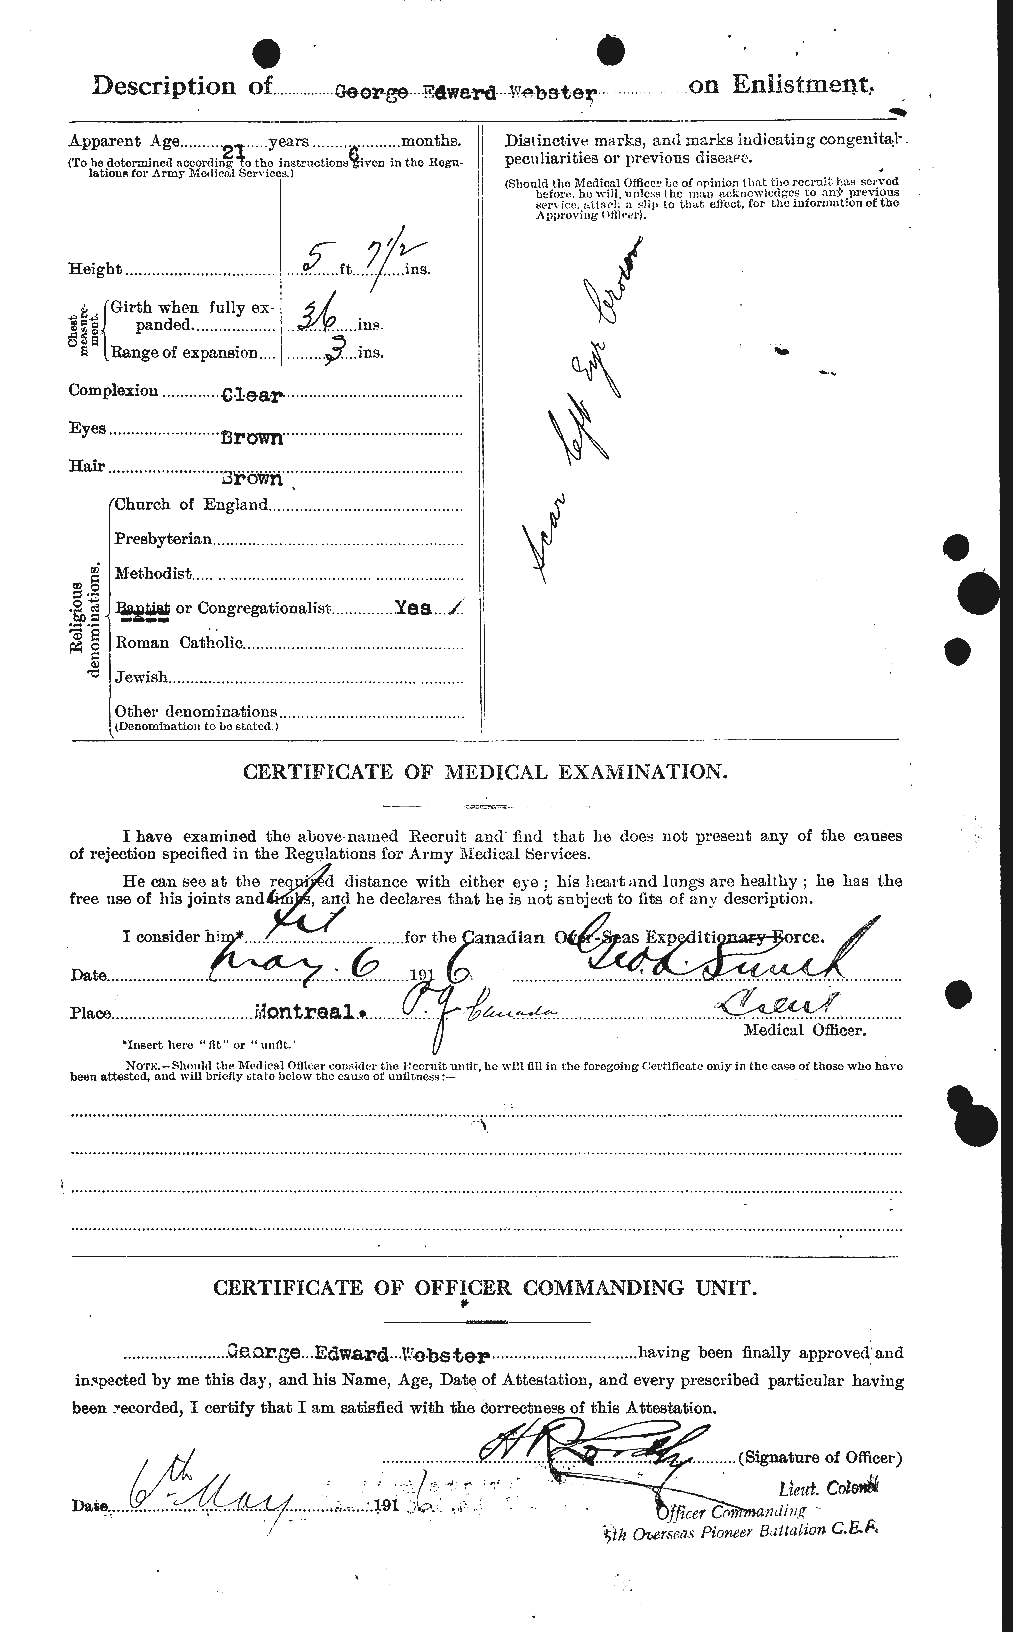 Personnel Records of the First World War - CEF 670383b